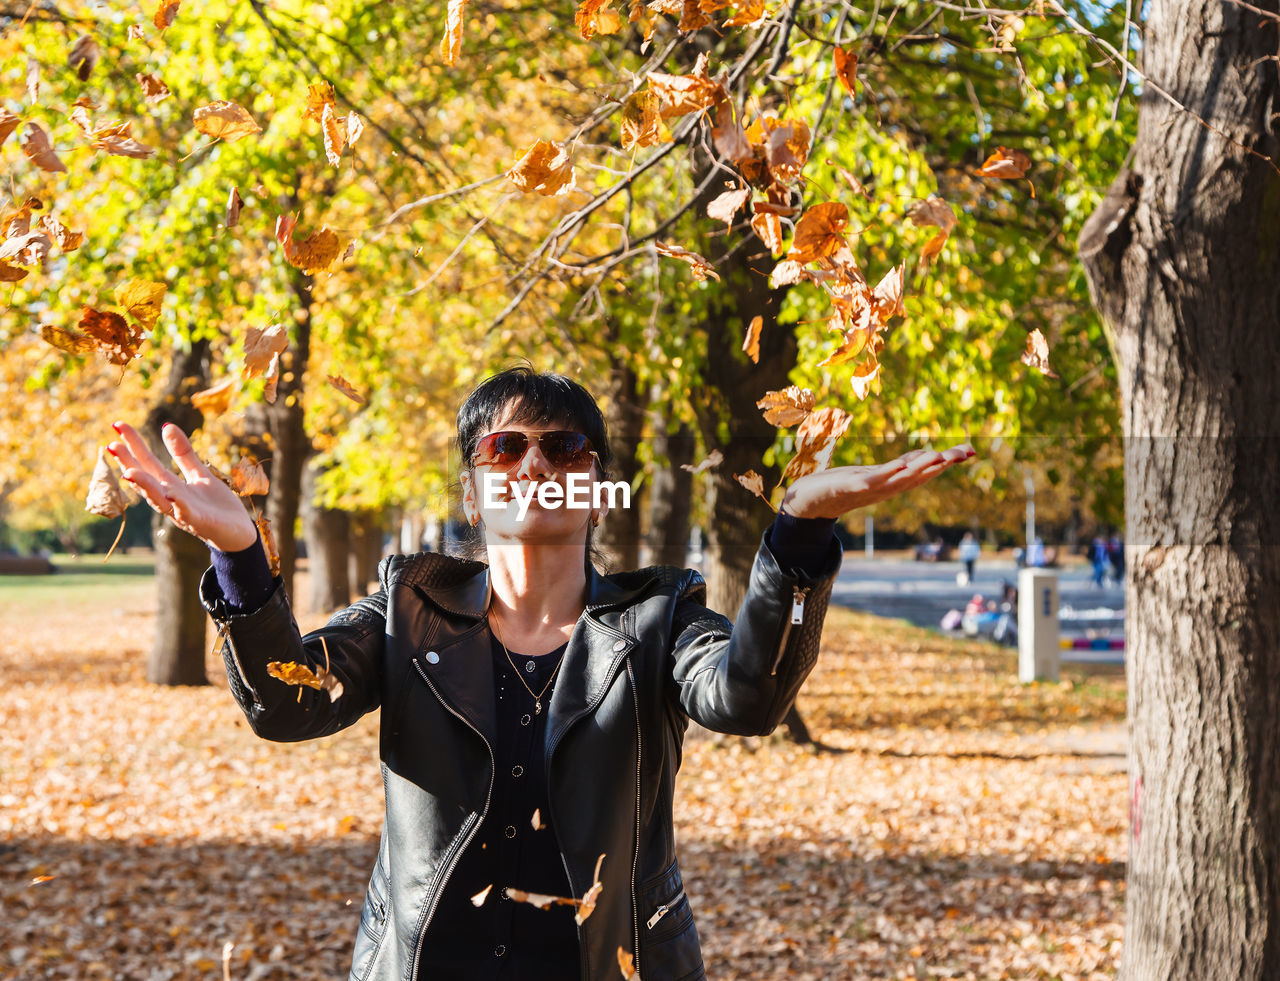 Woman with sunglasses standing on autumn leaves